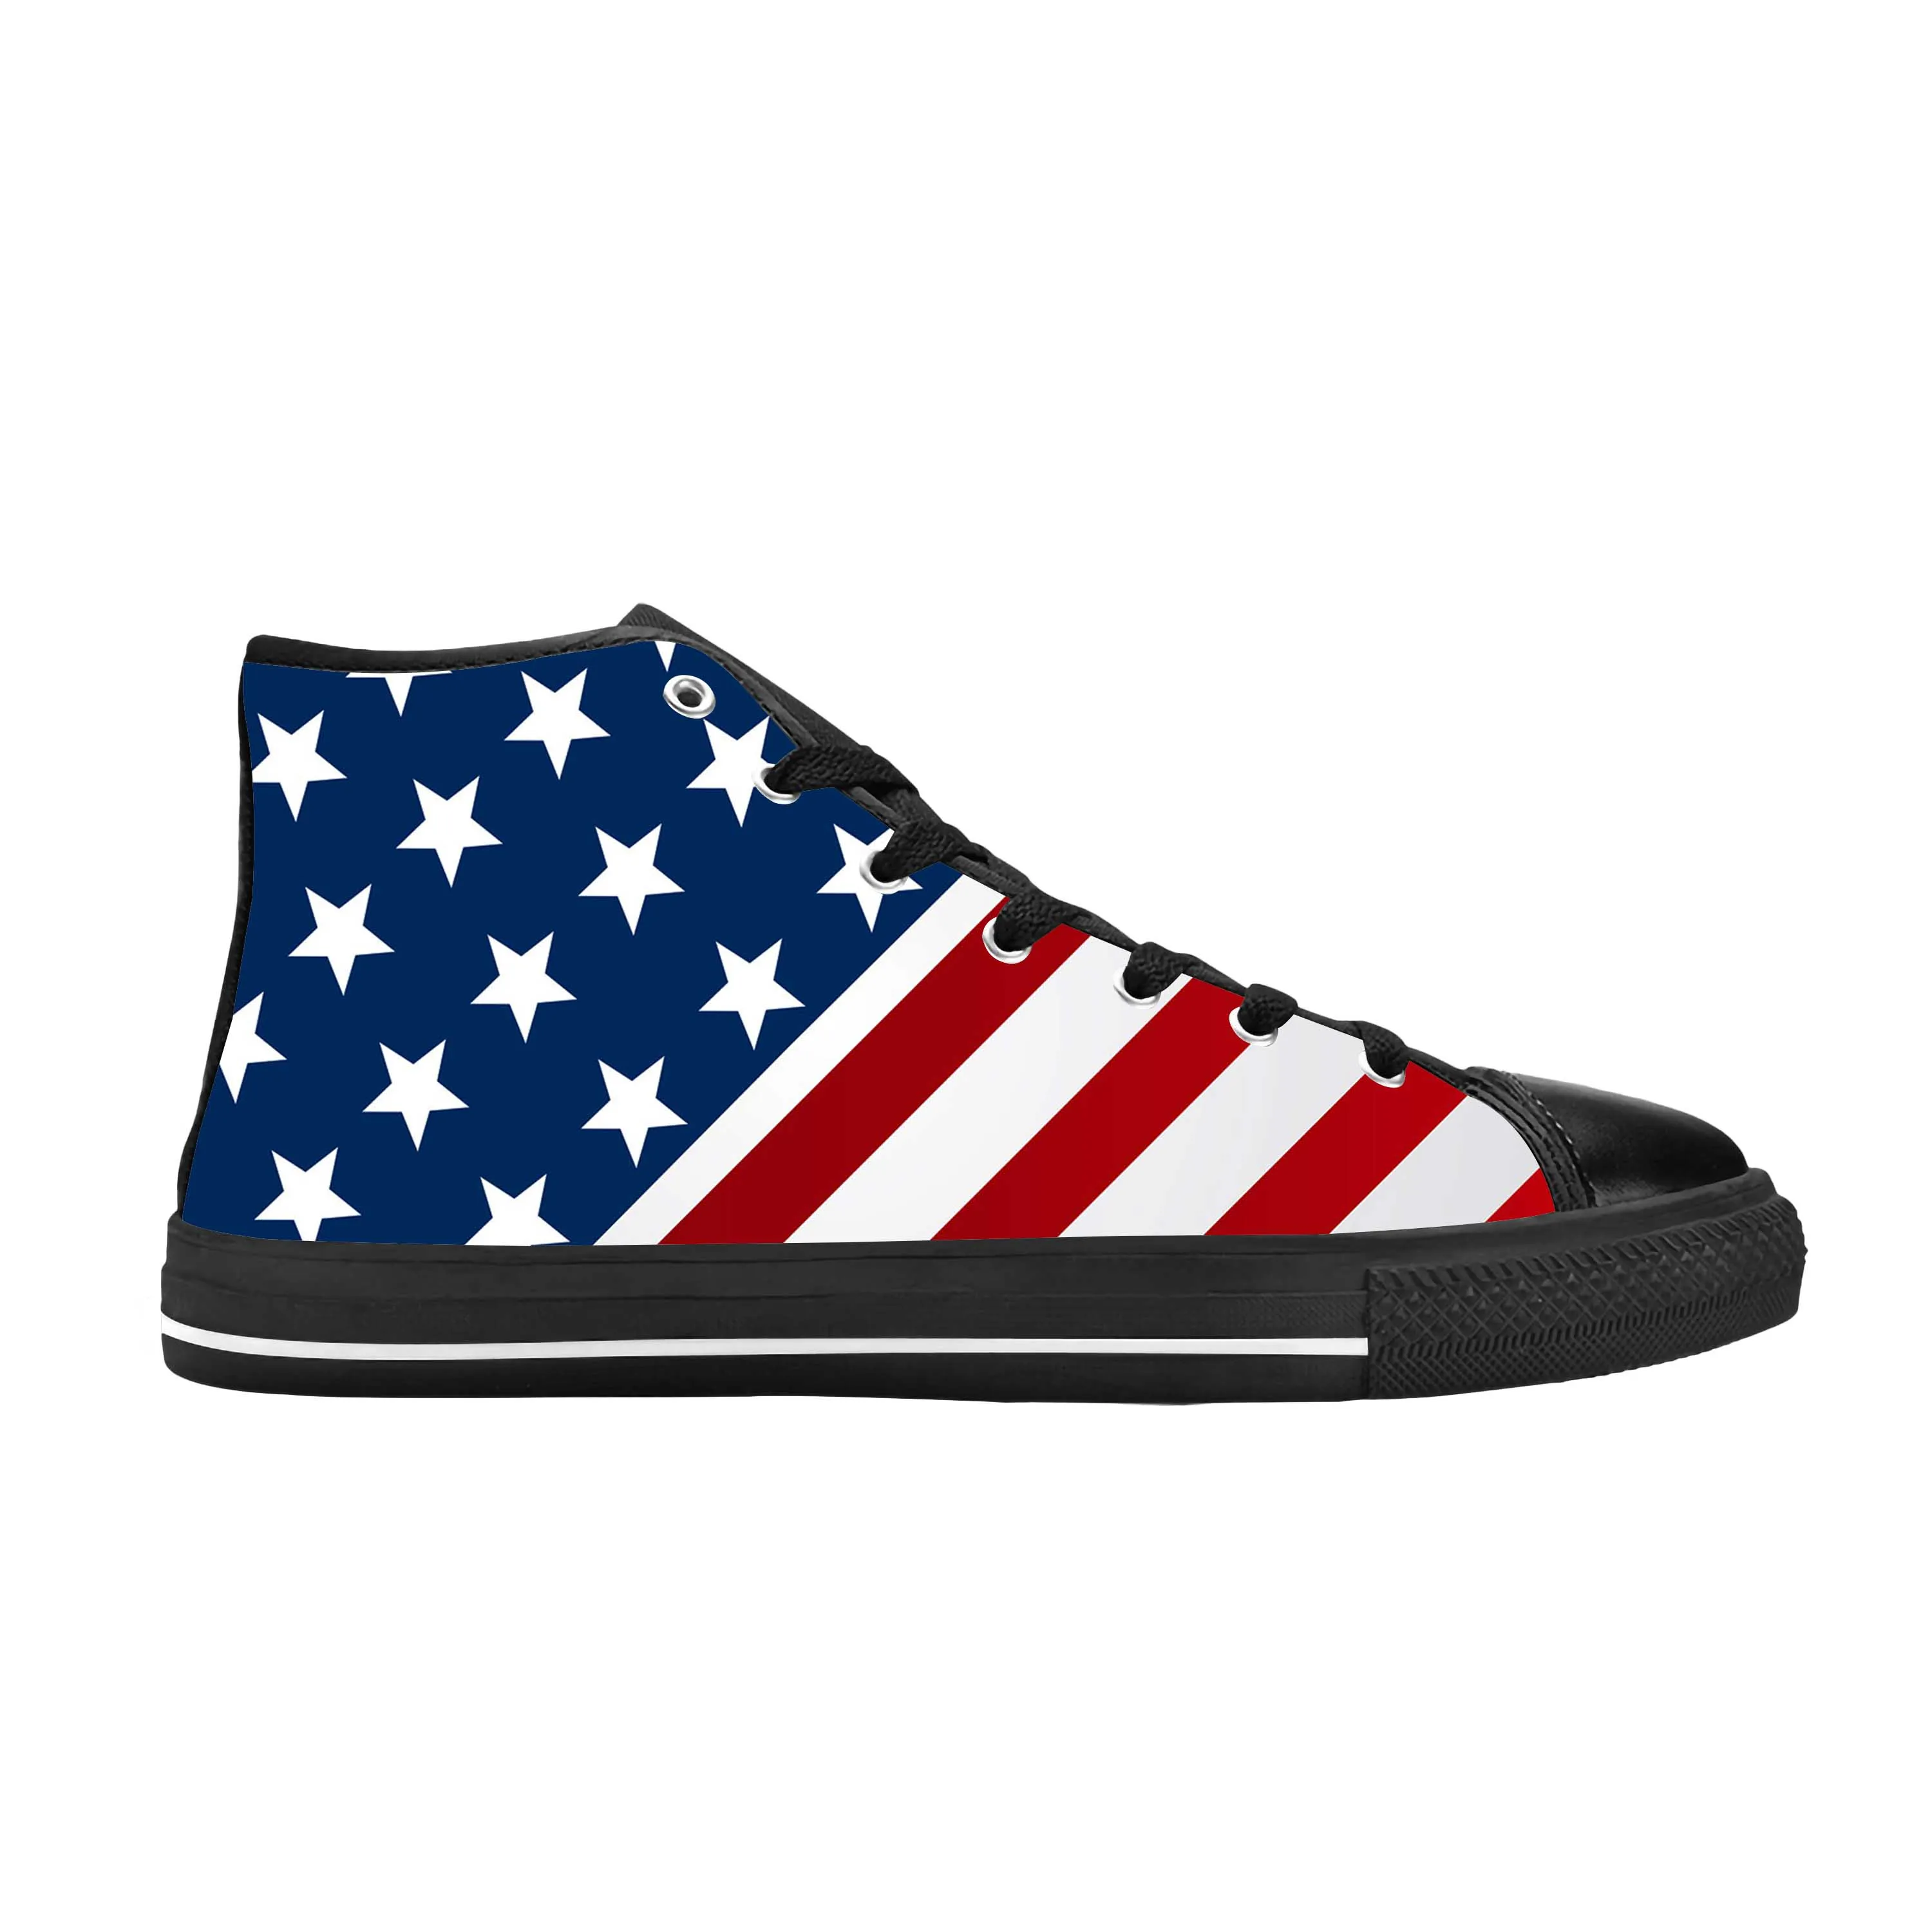 

Hot United States USA American Flag Stars Stripes Casual Cloth Shoes High Top Comfortable Breathable 3D Print Men Women Sneakers